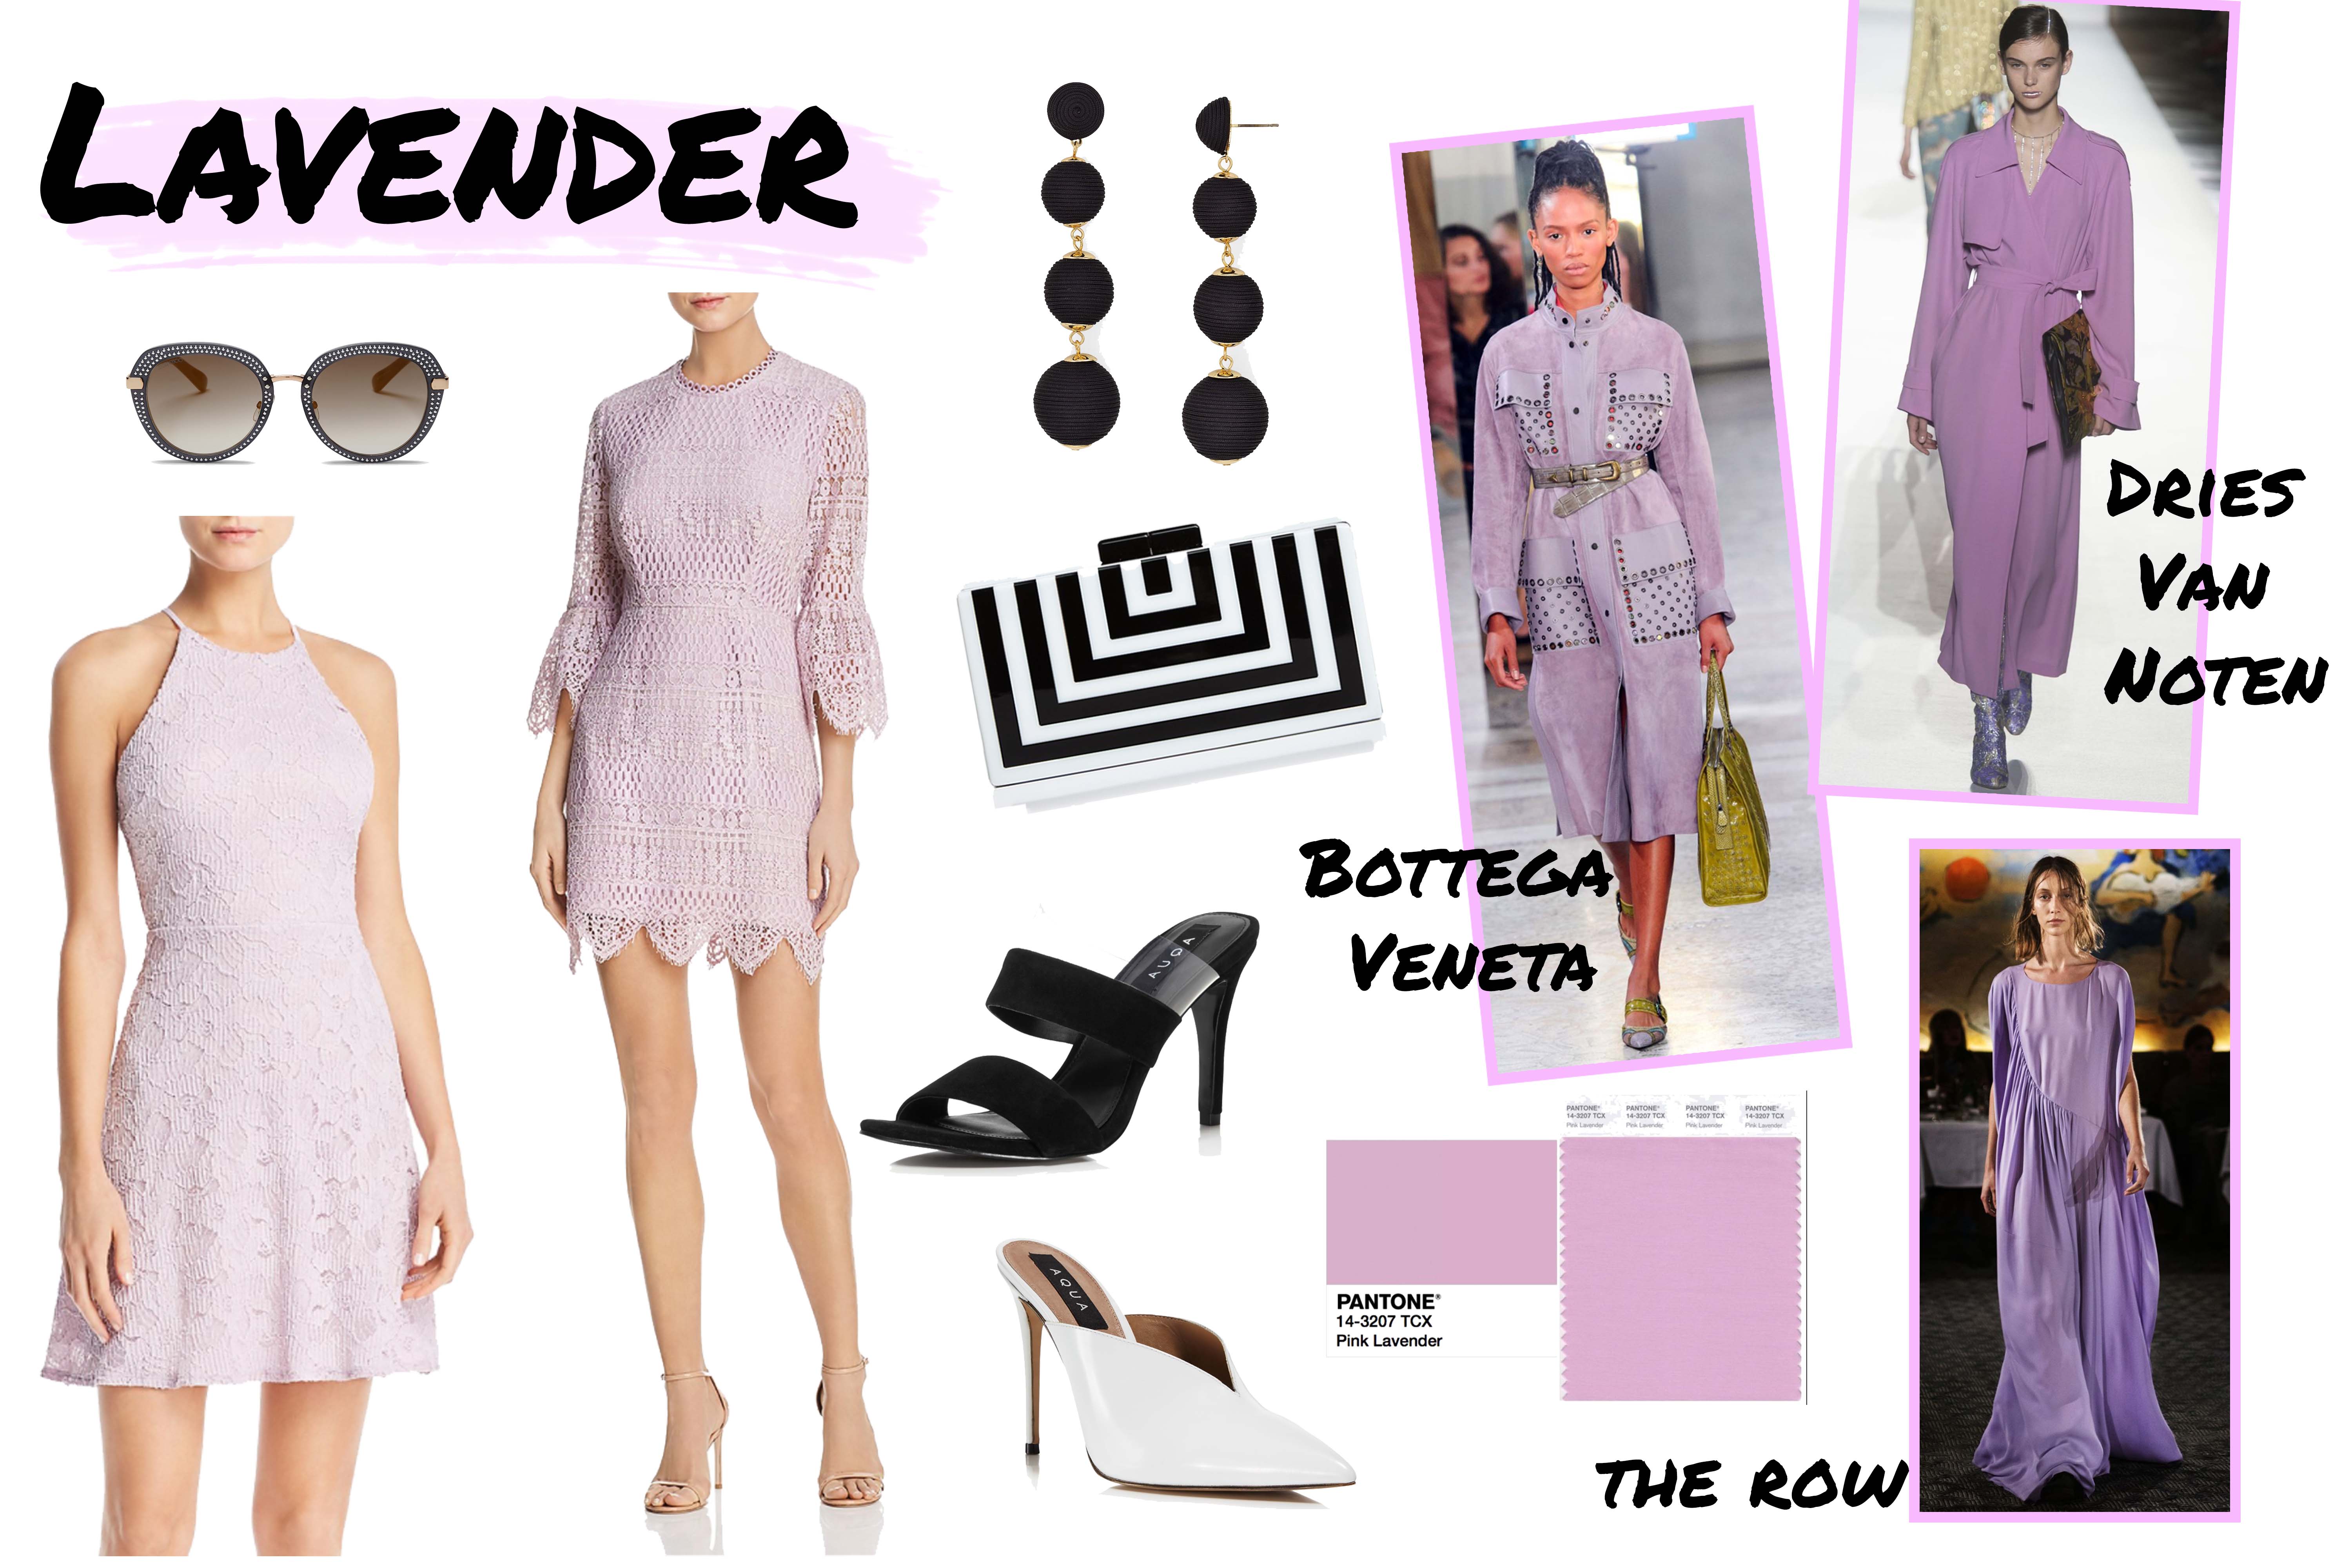 Bloomingdales Hot Fashion Show-lavender-spring trends-mood board-style-shop the post